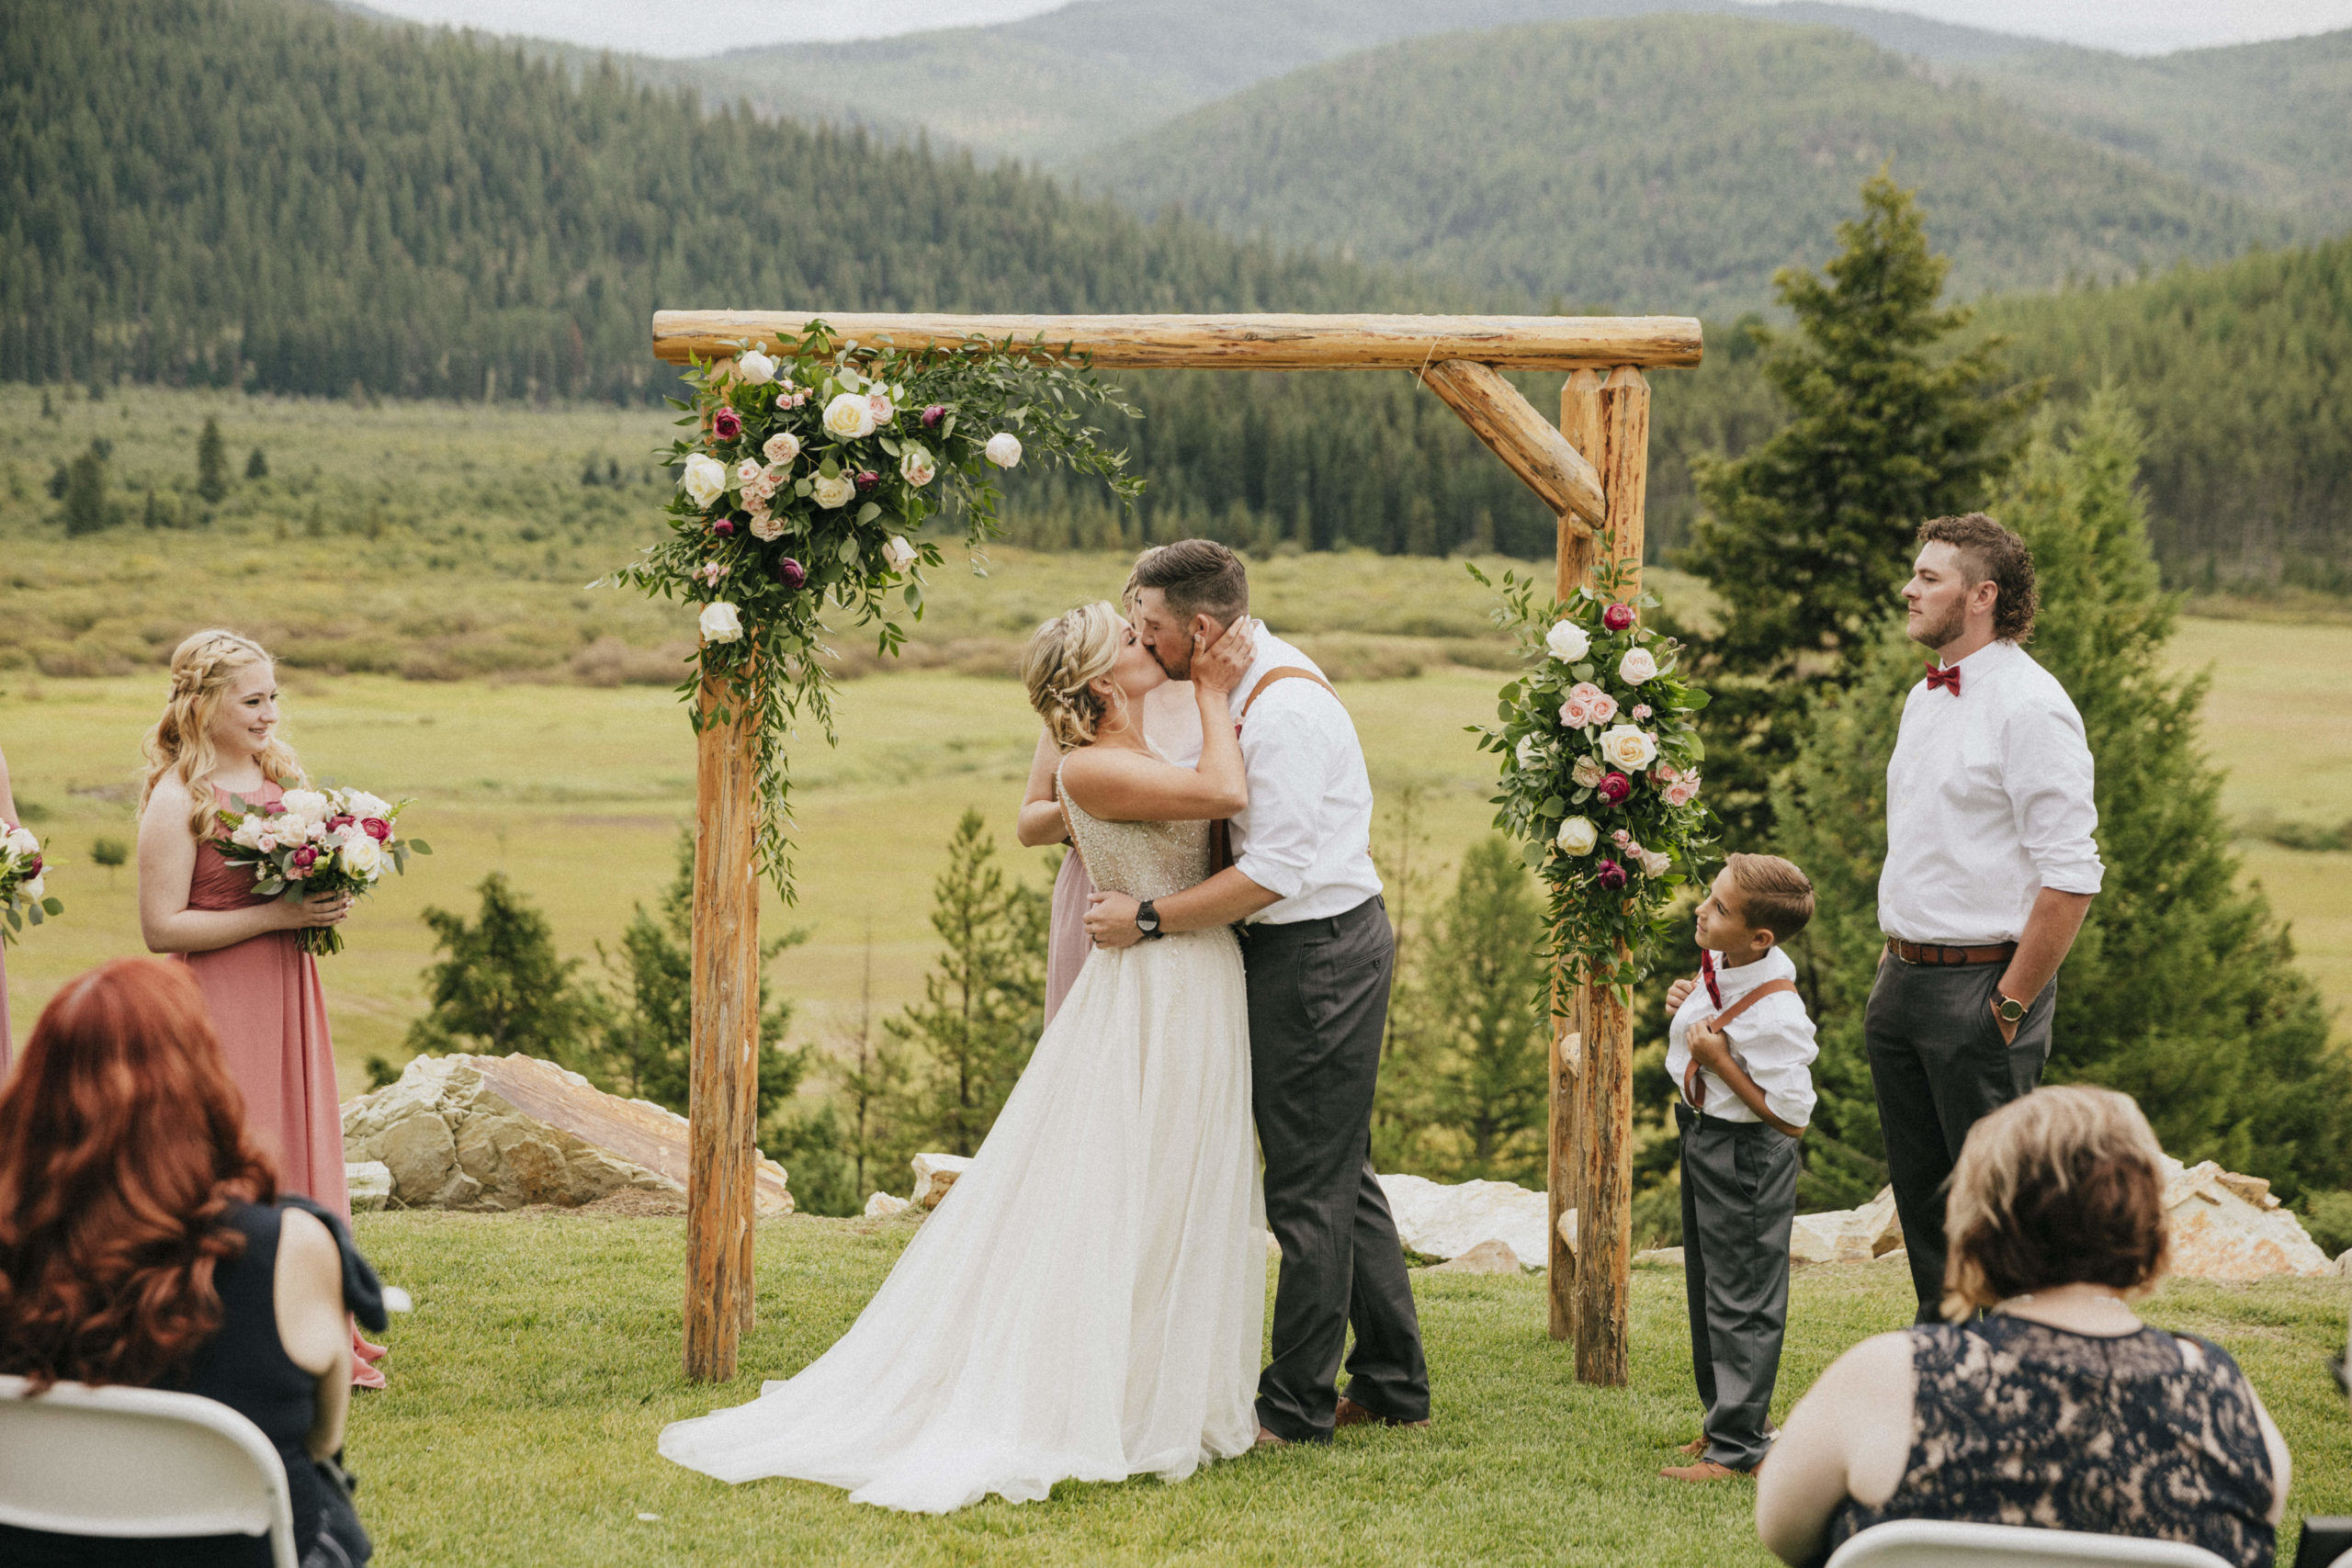 Bride and groom's first kiss at their ranch wedding